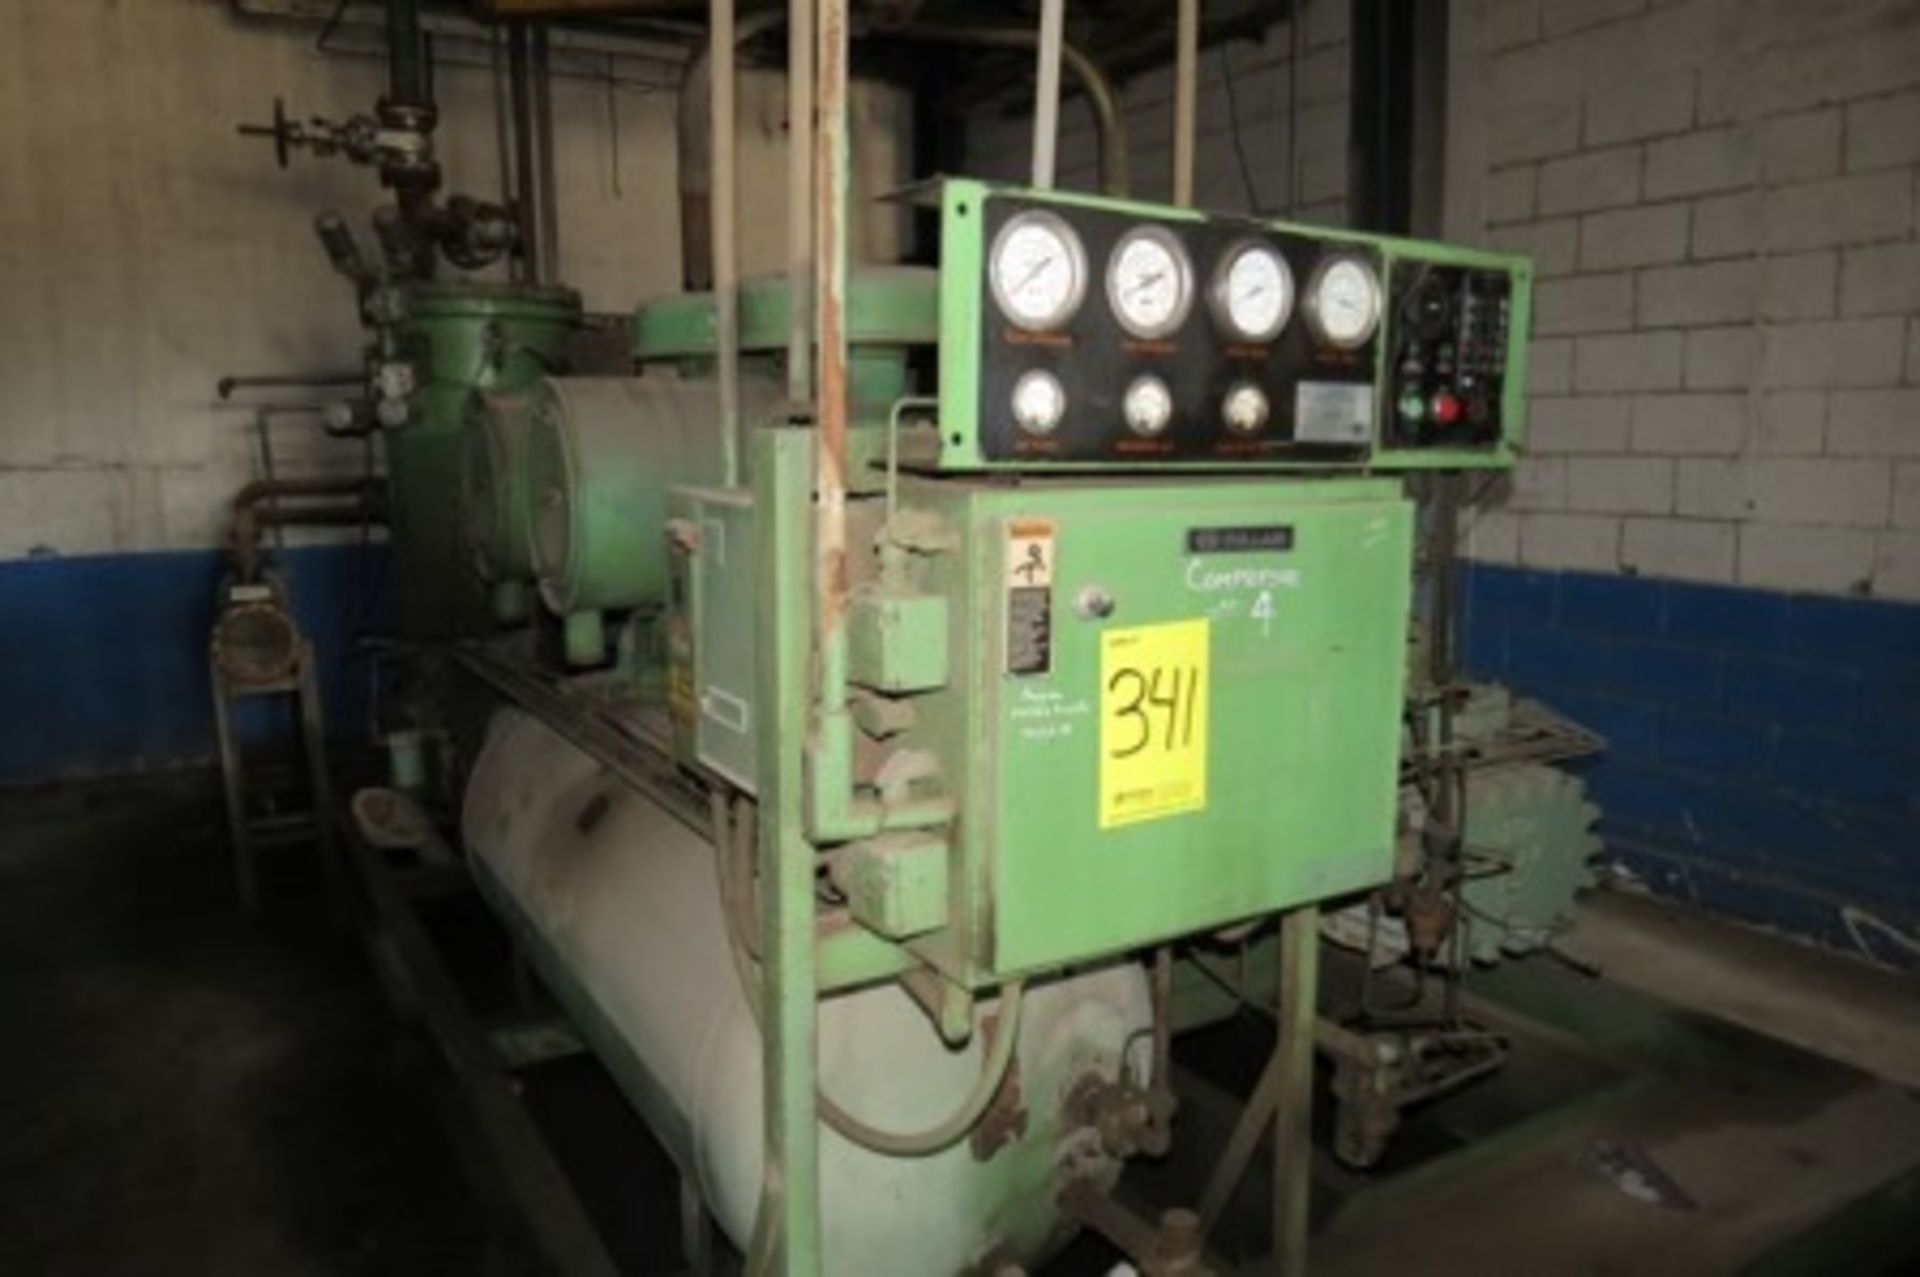 Air compressor Sullair 32 / 25-400L AC s/n 003-77334, 1989, rotary screw, 450 hp - Image 3 of 22